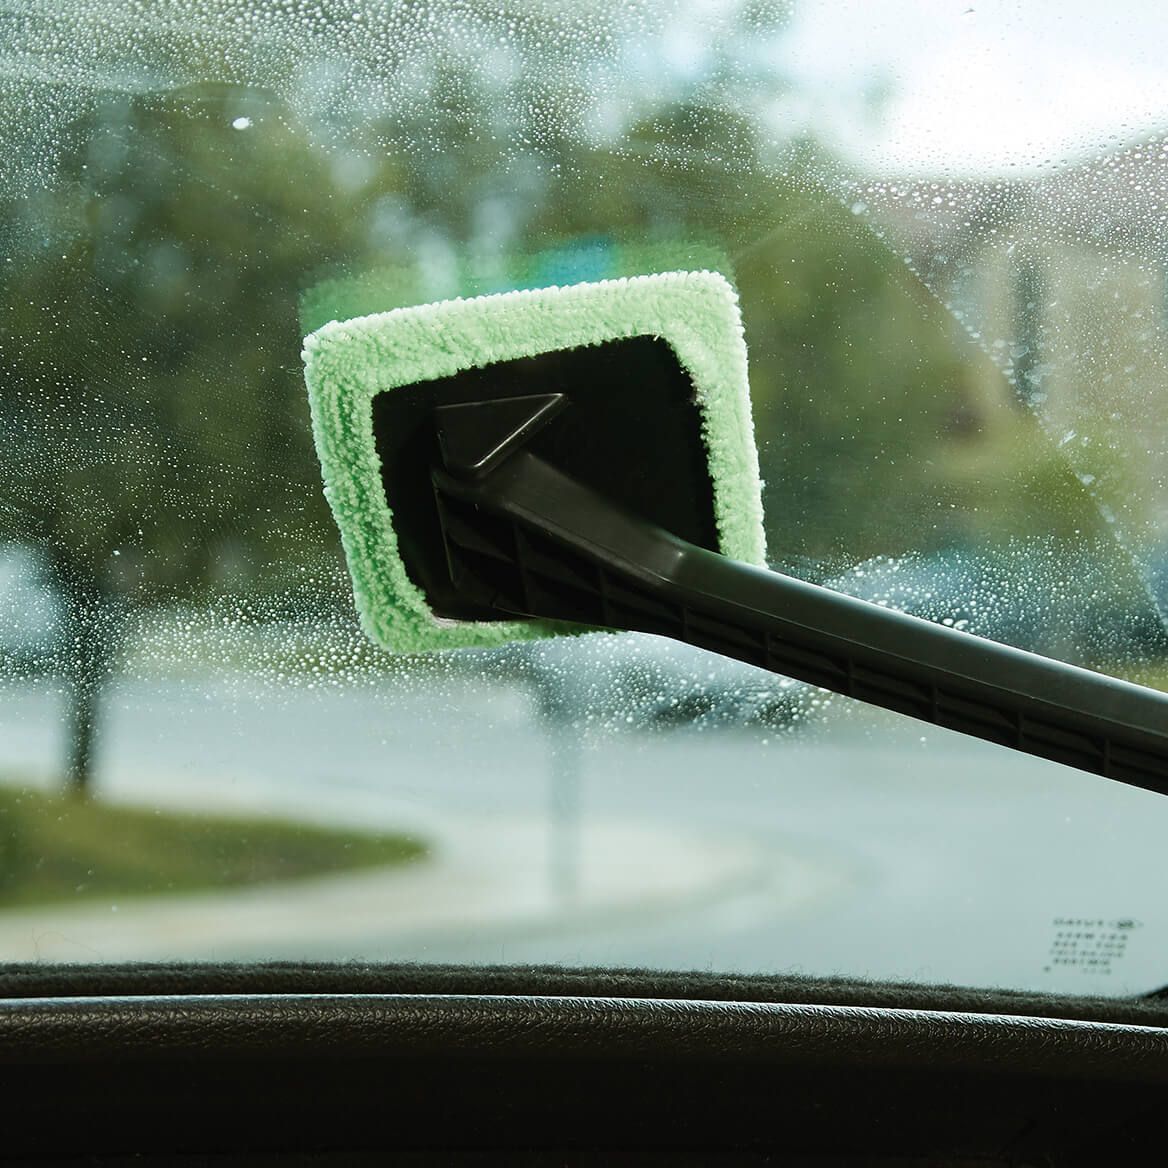 Windshield Cleaning Wand + '-' + 372321